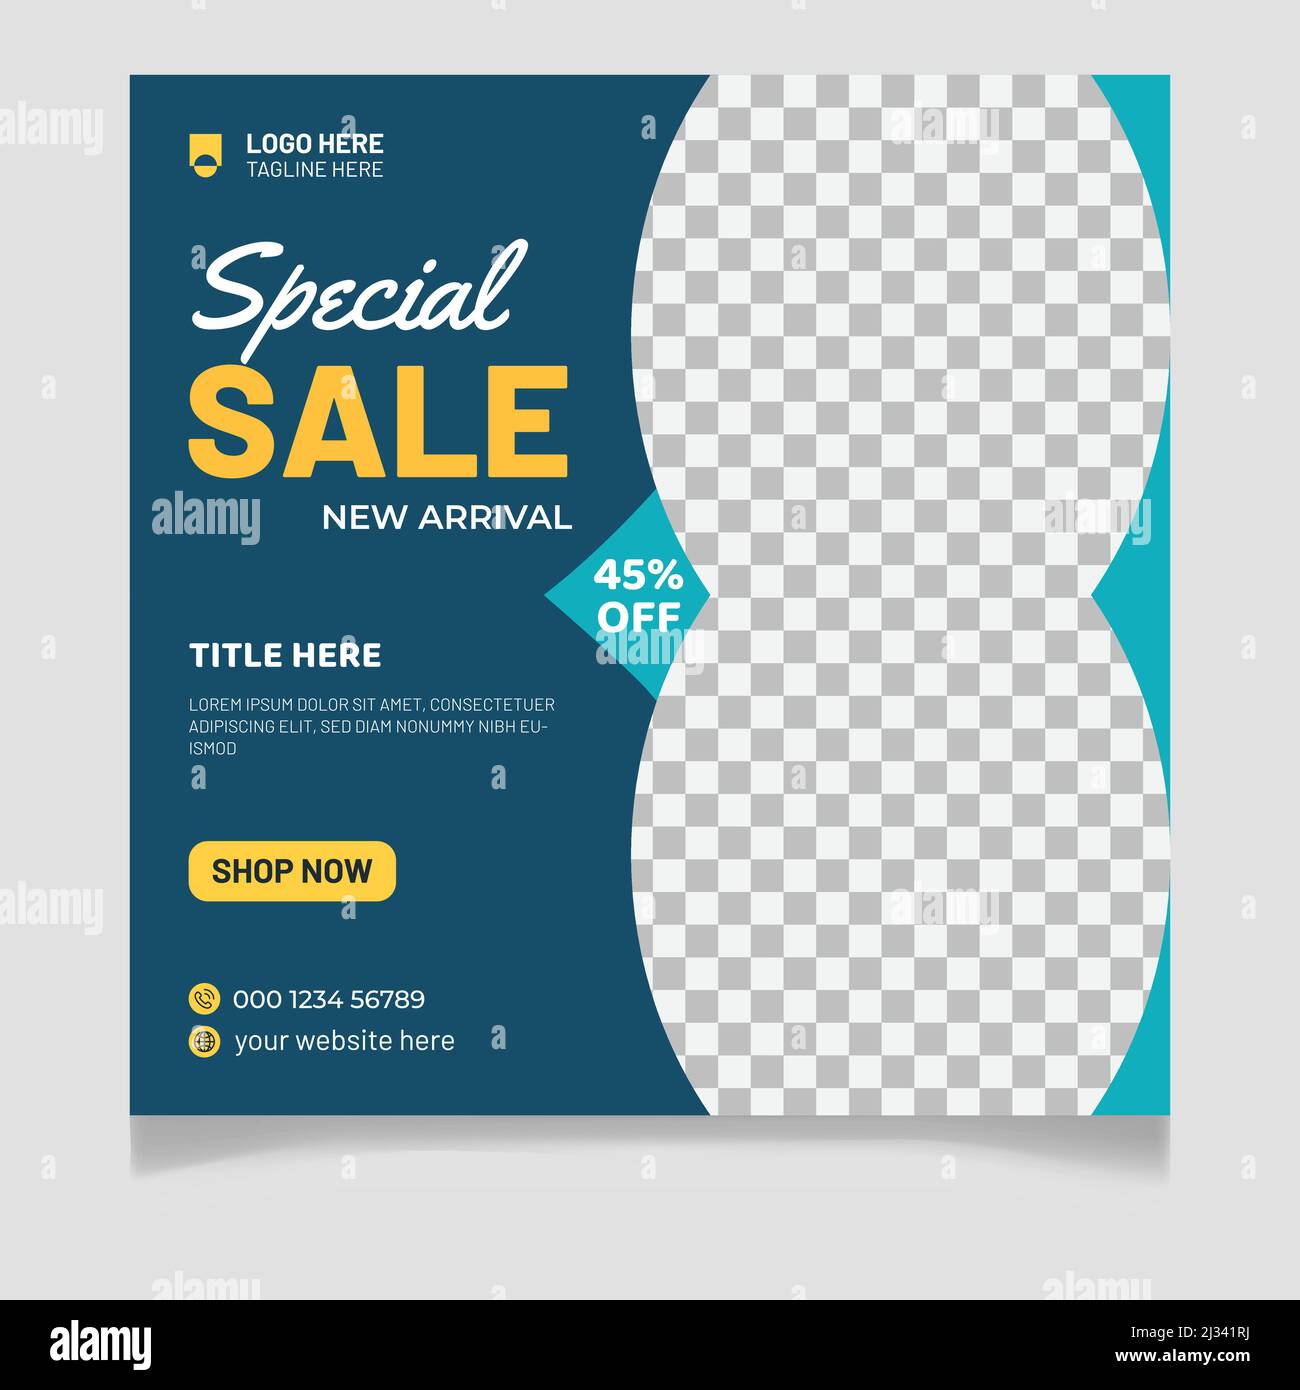 Special Sale New Arrival Fashion Social Media Post Template Stock Vector